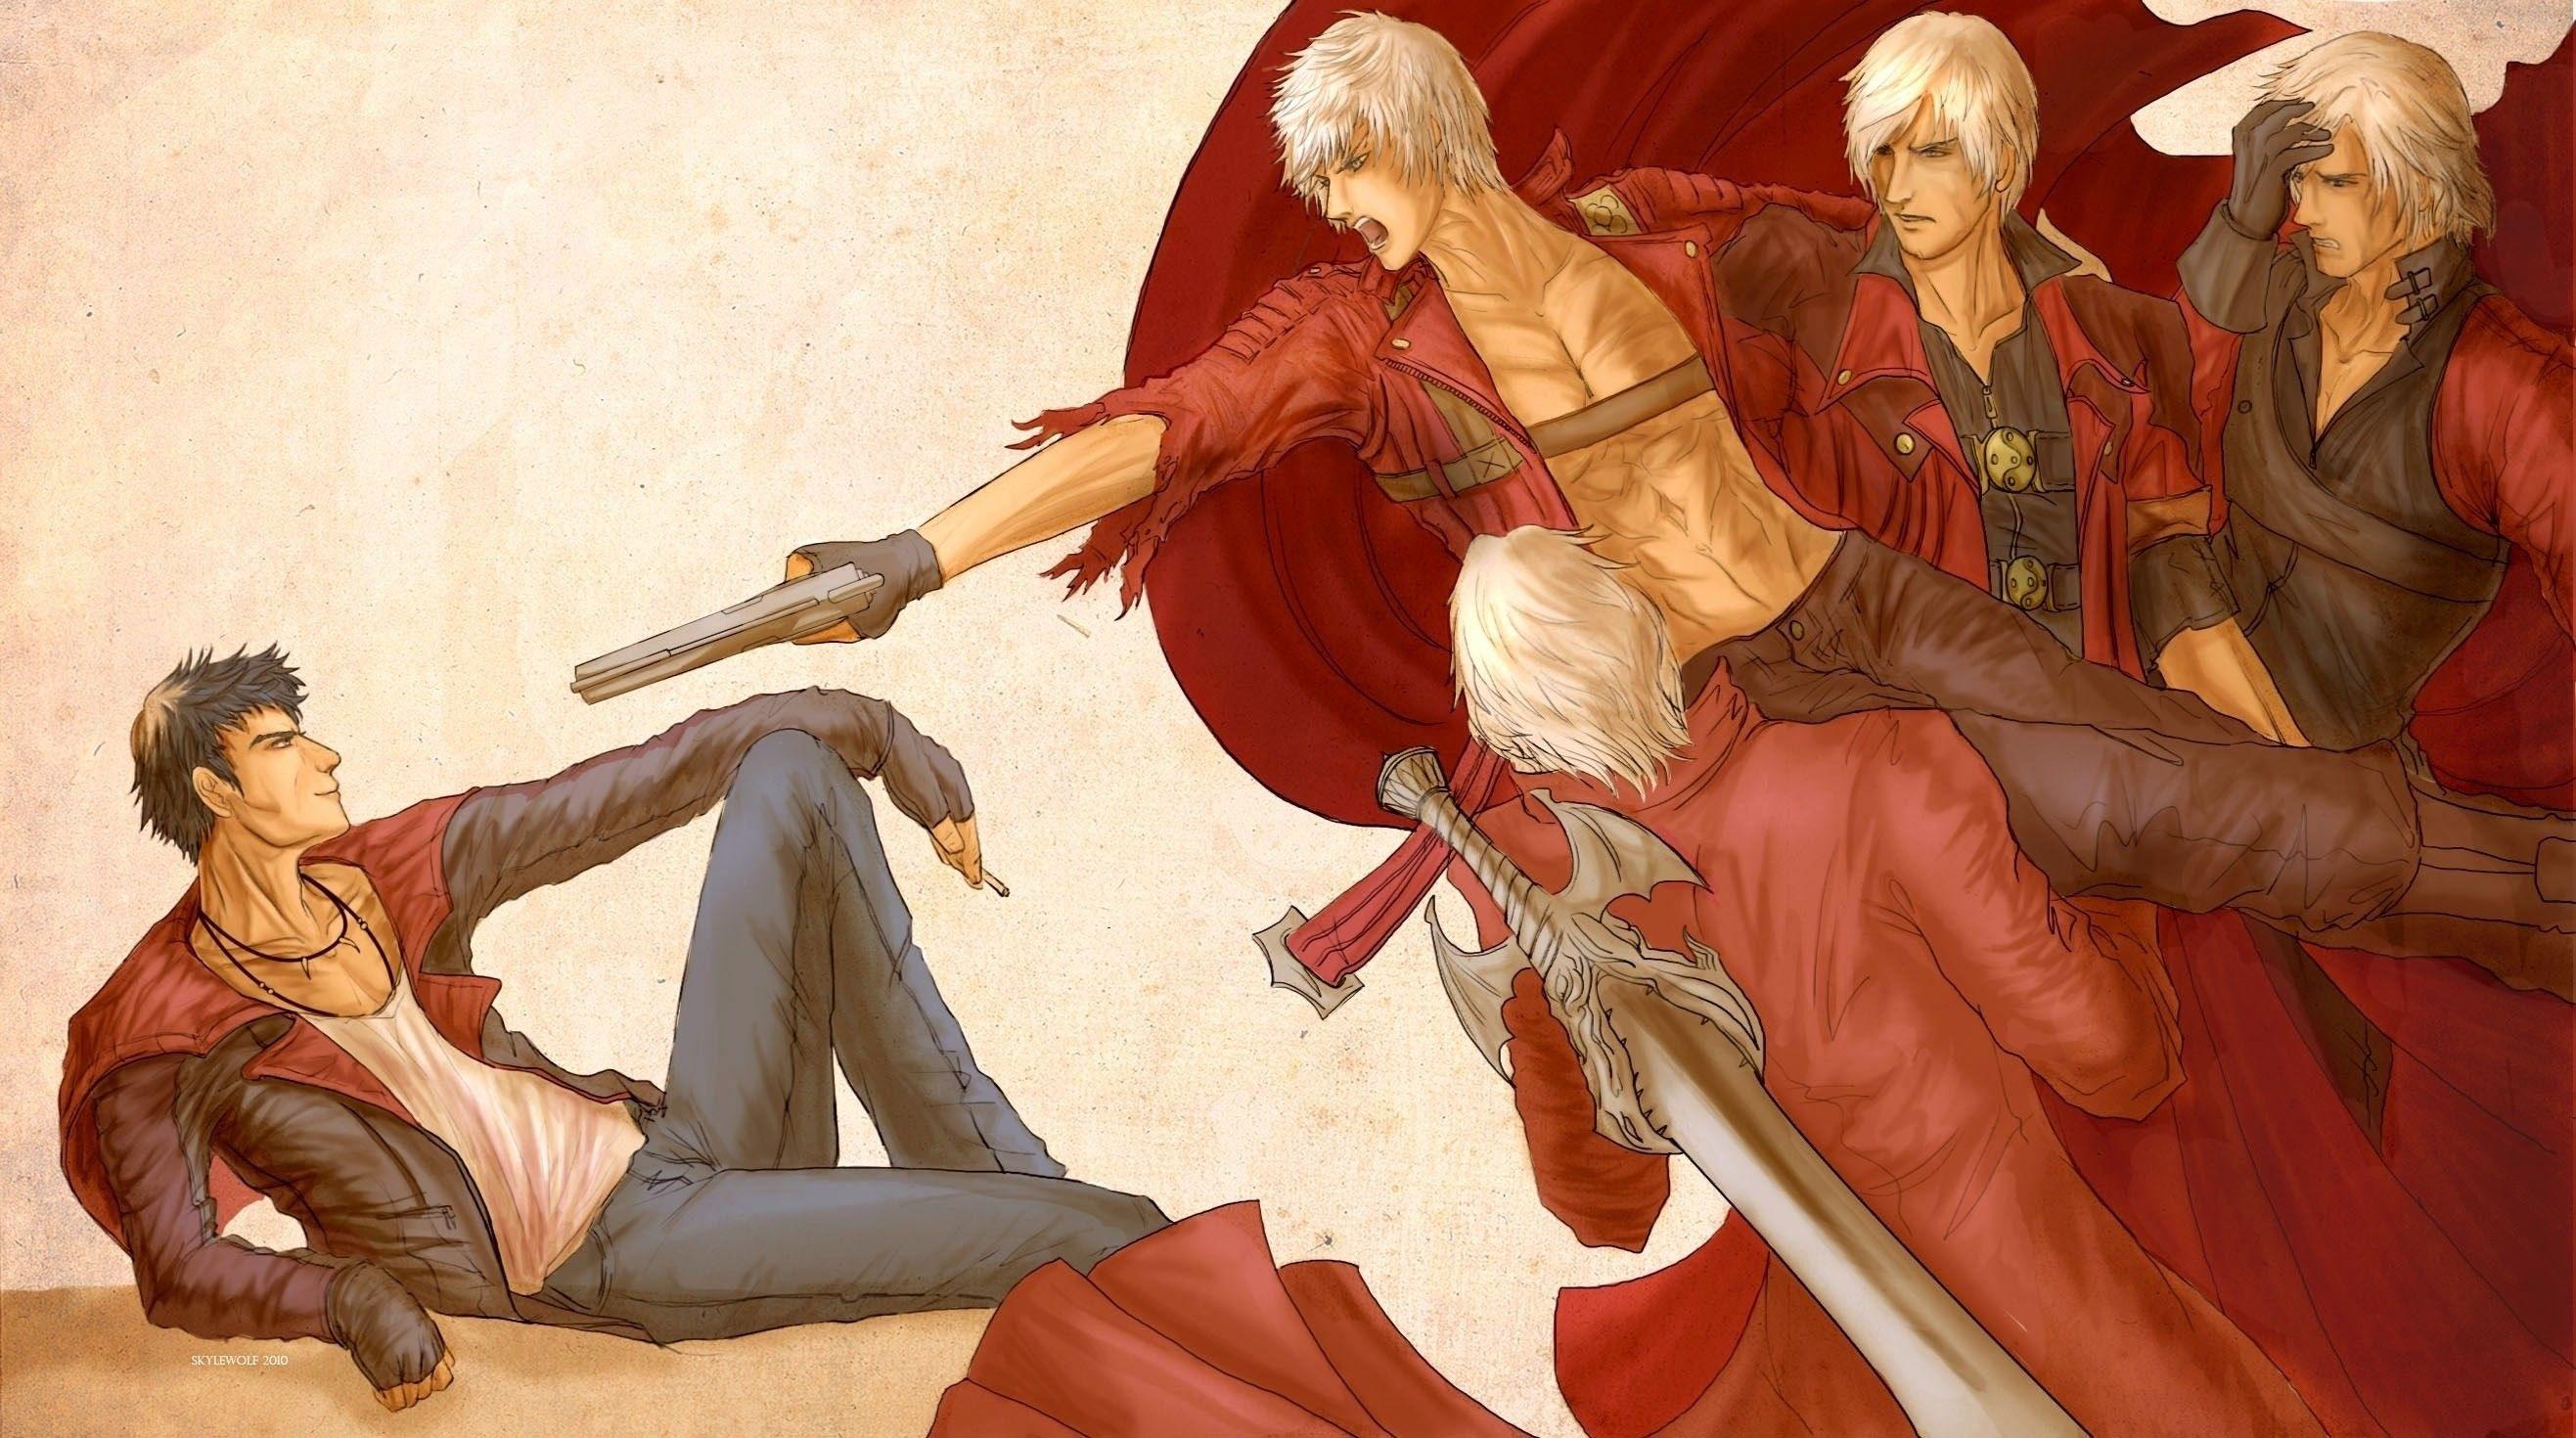 Devil May Cry Anime Wallpaper